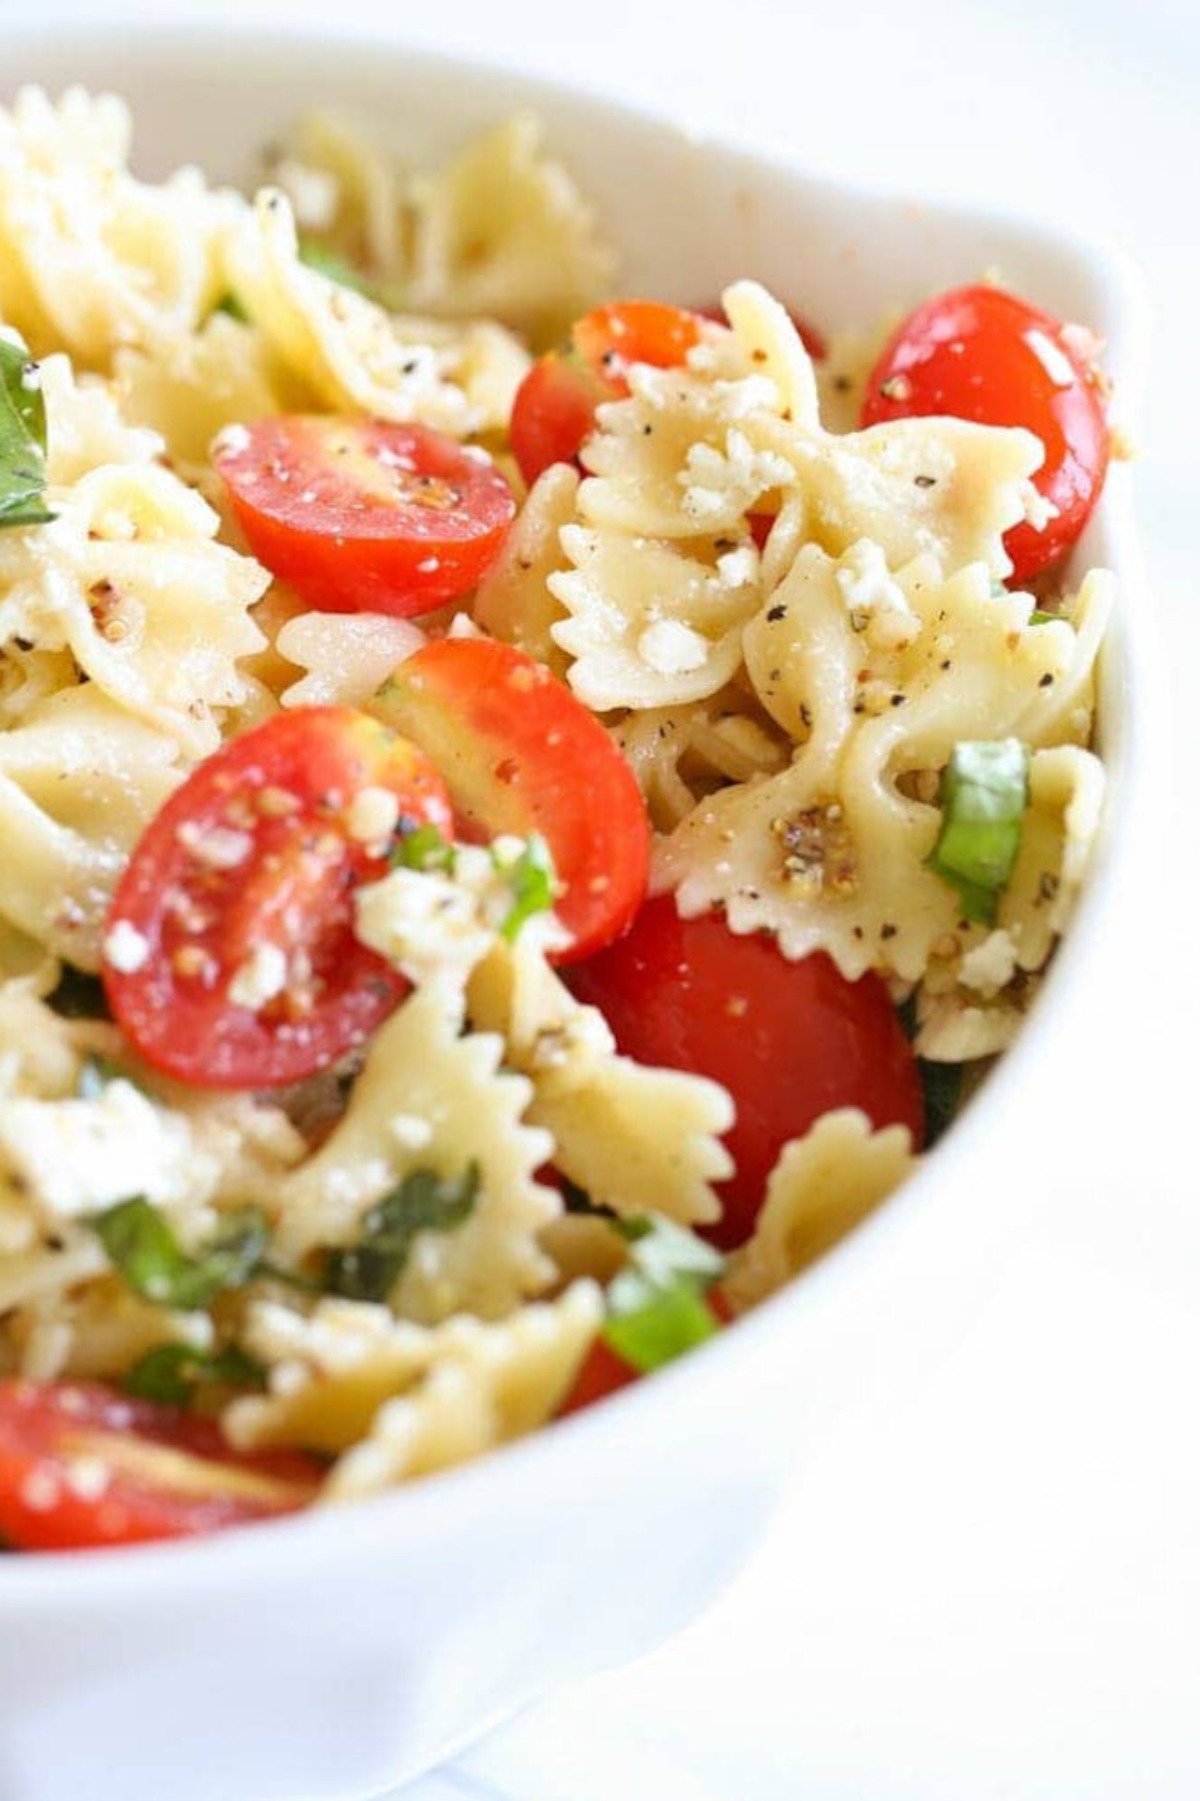 A bowl of easy pasta salad with cherry tomatoes and herbs.